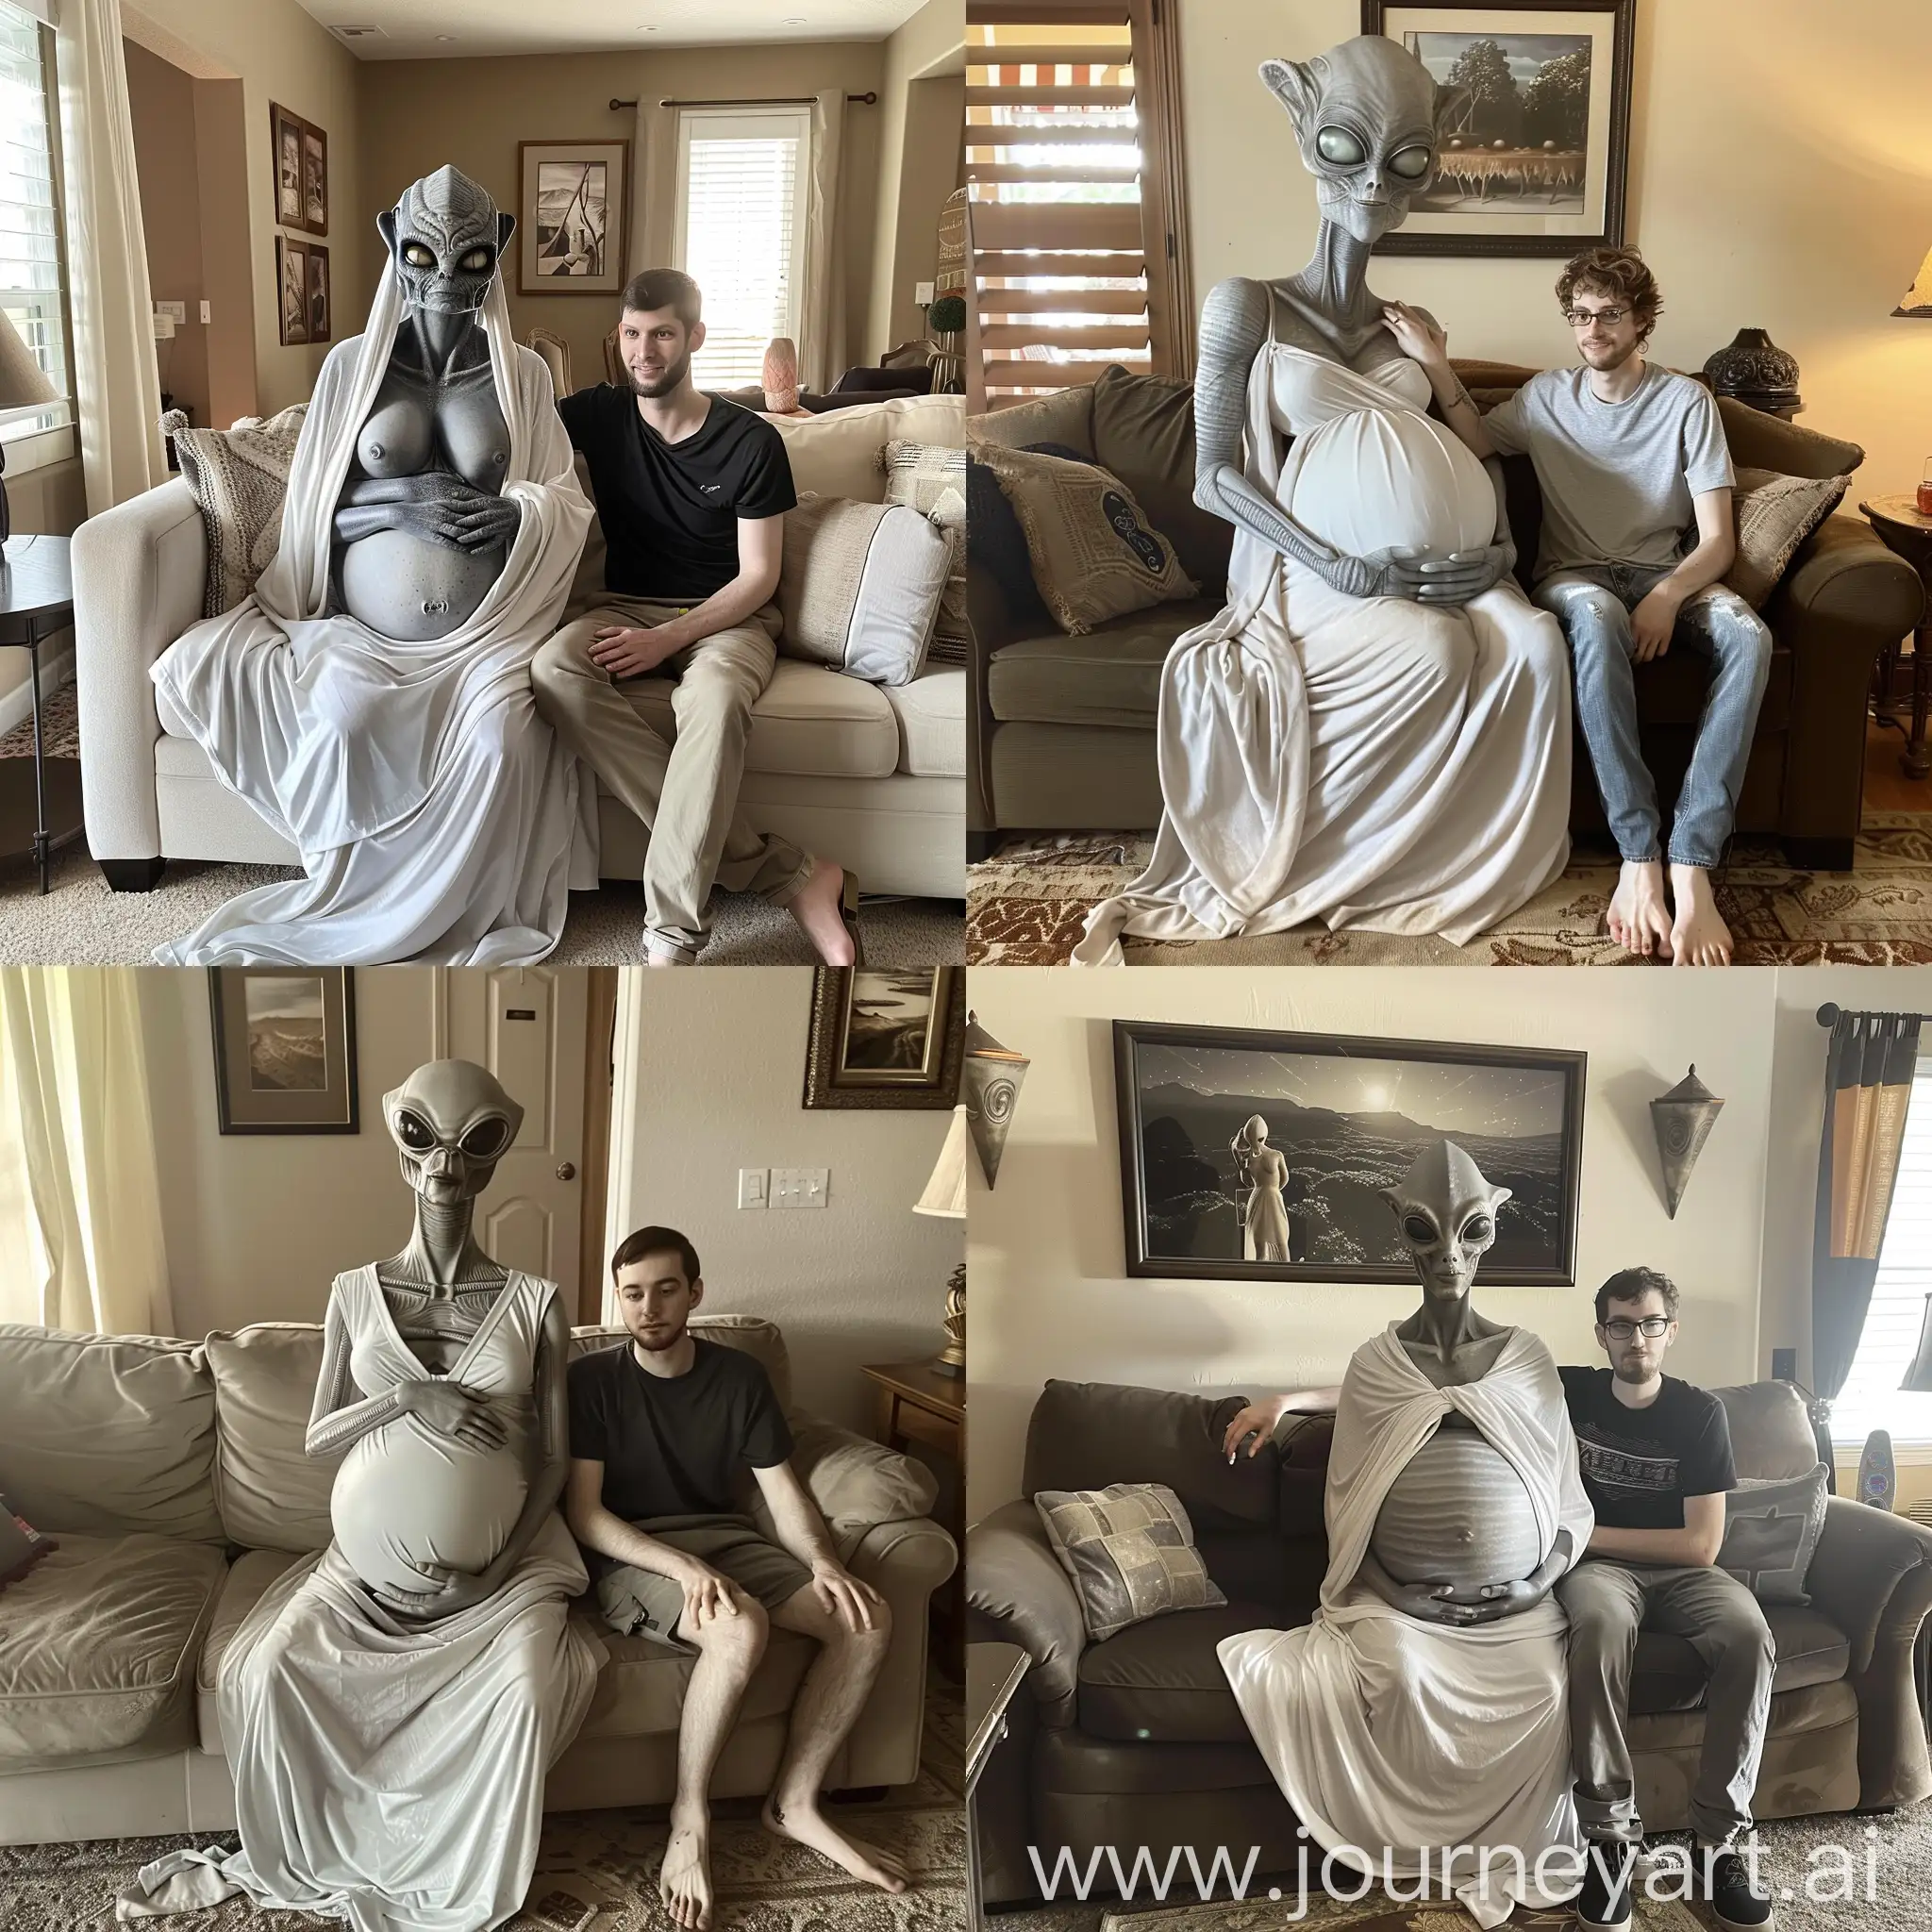 Pregnant-Gray-Alien-with-Triplets-Embracing-Human-Caretaker-in-Living-Room